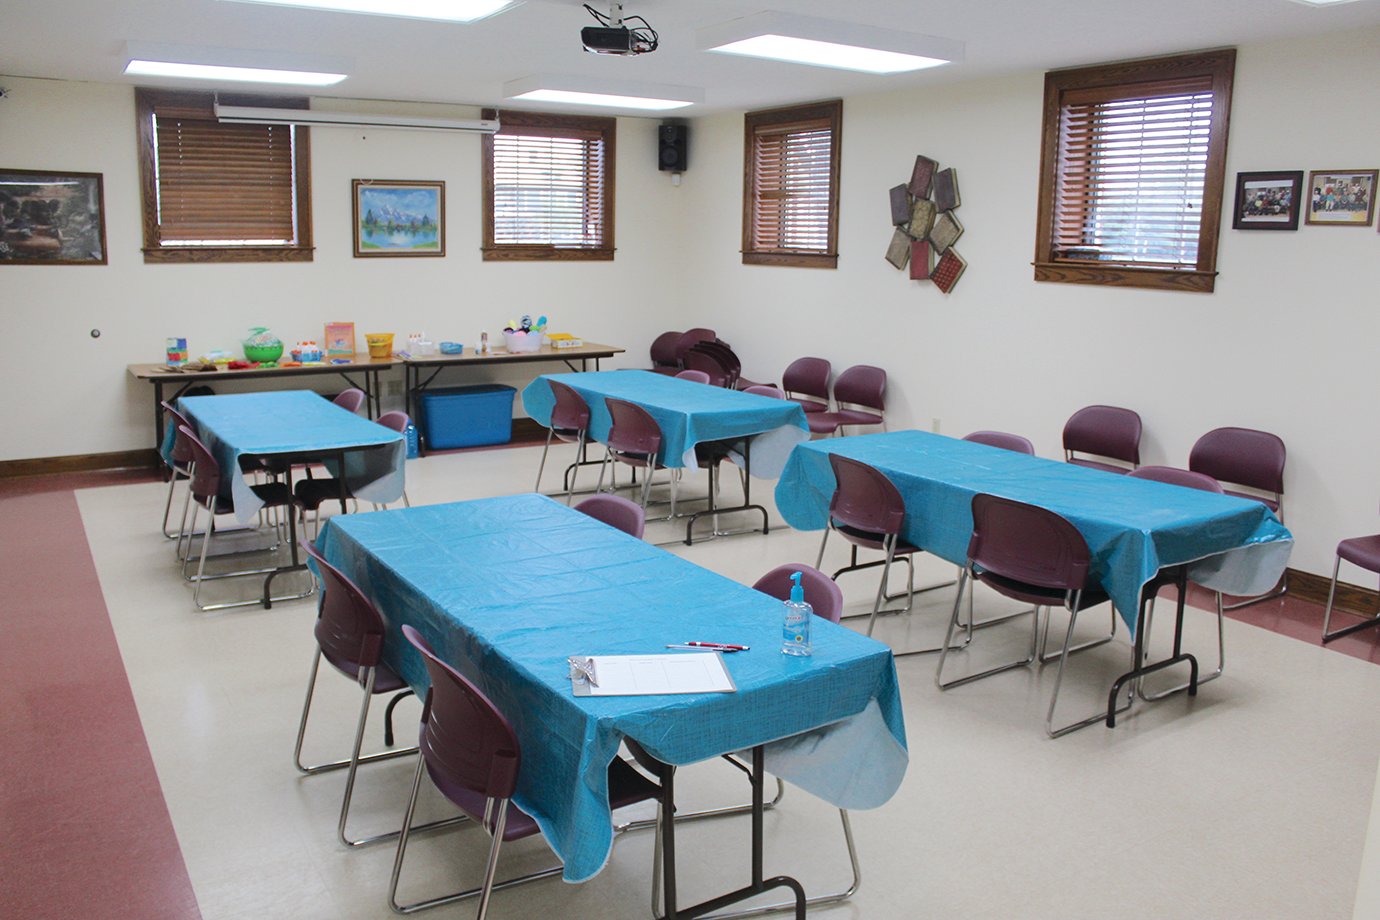 The community room in the basement of the Linden Public Library awaits kiddos letting out from school Thursday ahead of Kids Night.